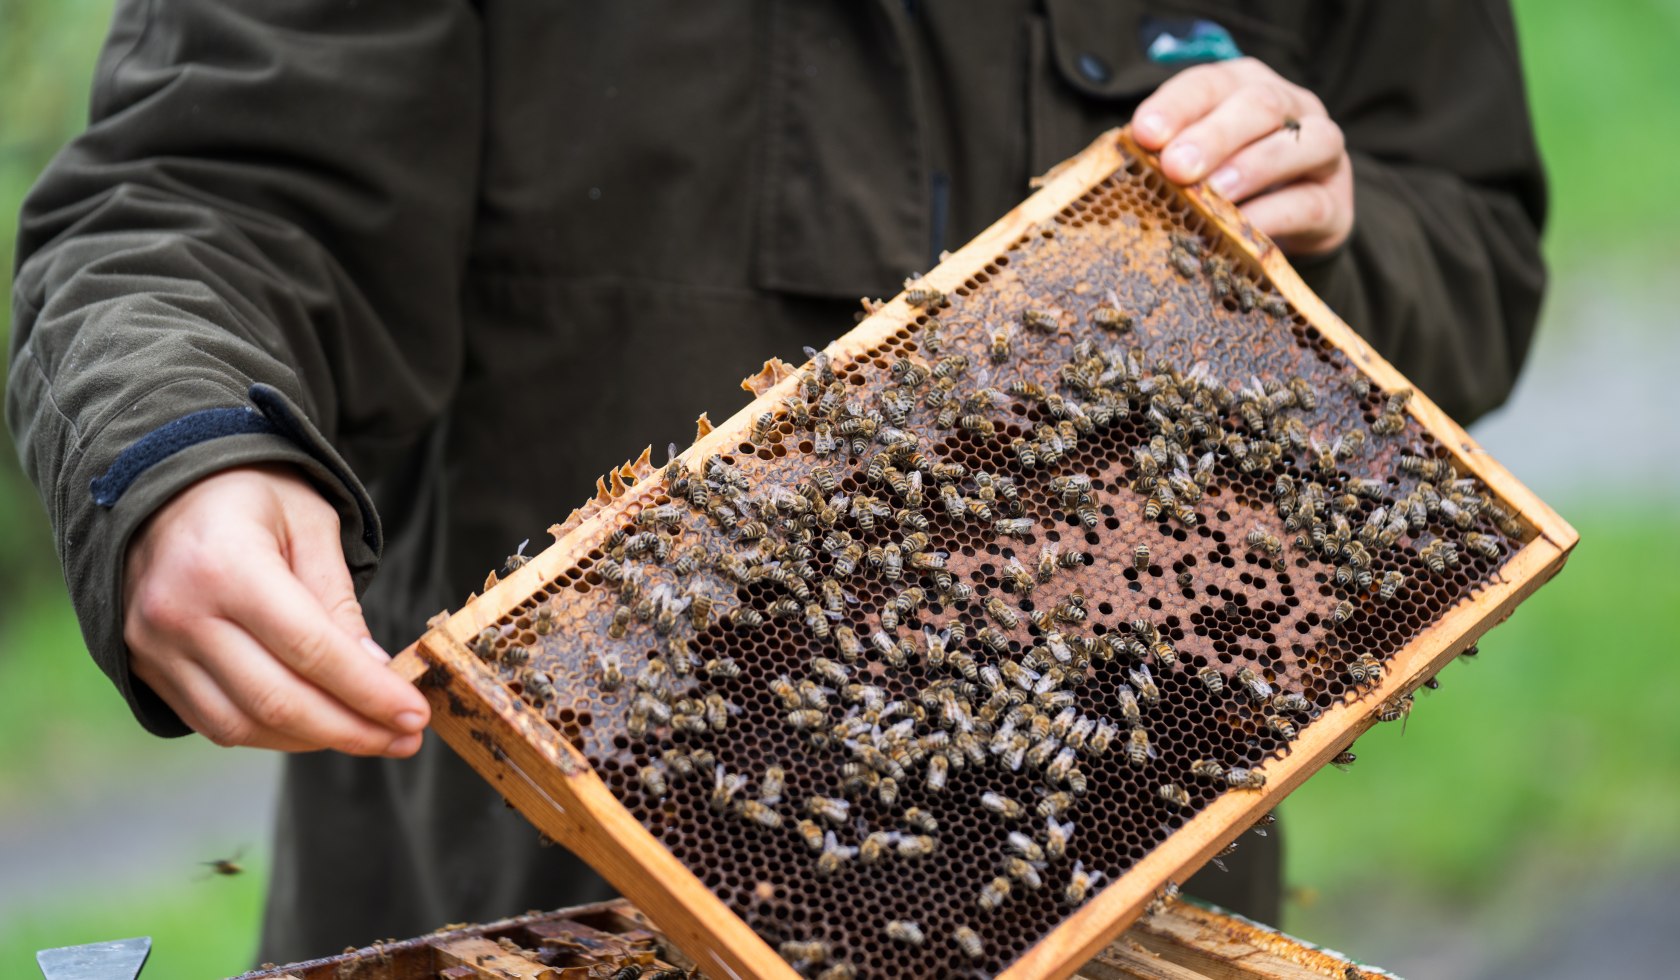 Drawer with bees and honey, © TourismusMarketing Niedersachsen GmbH 